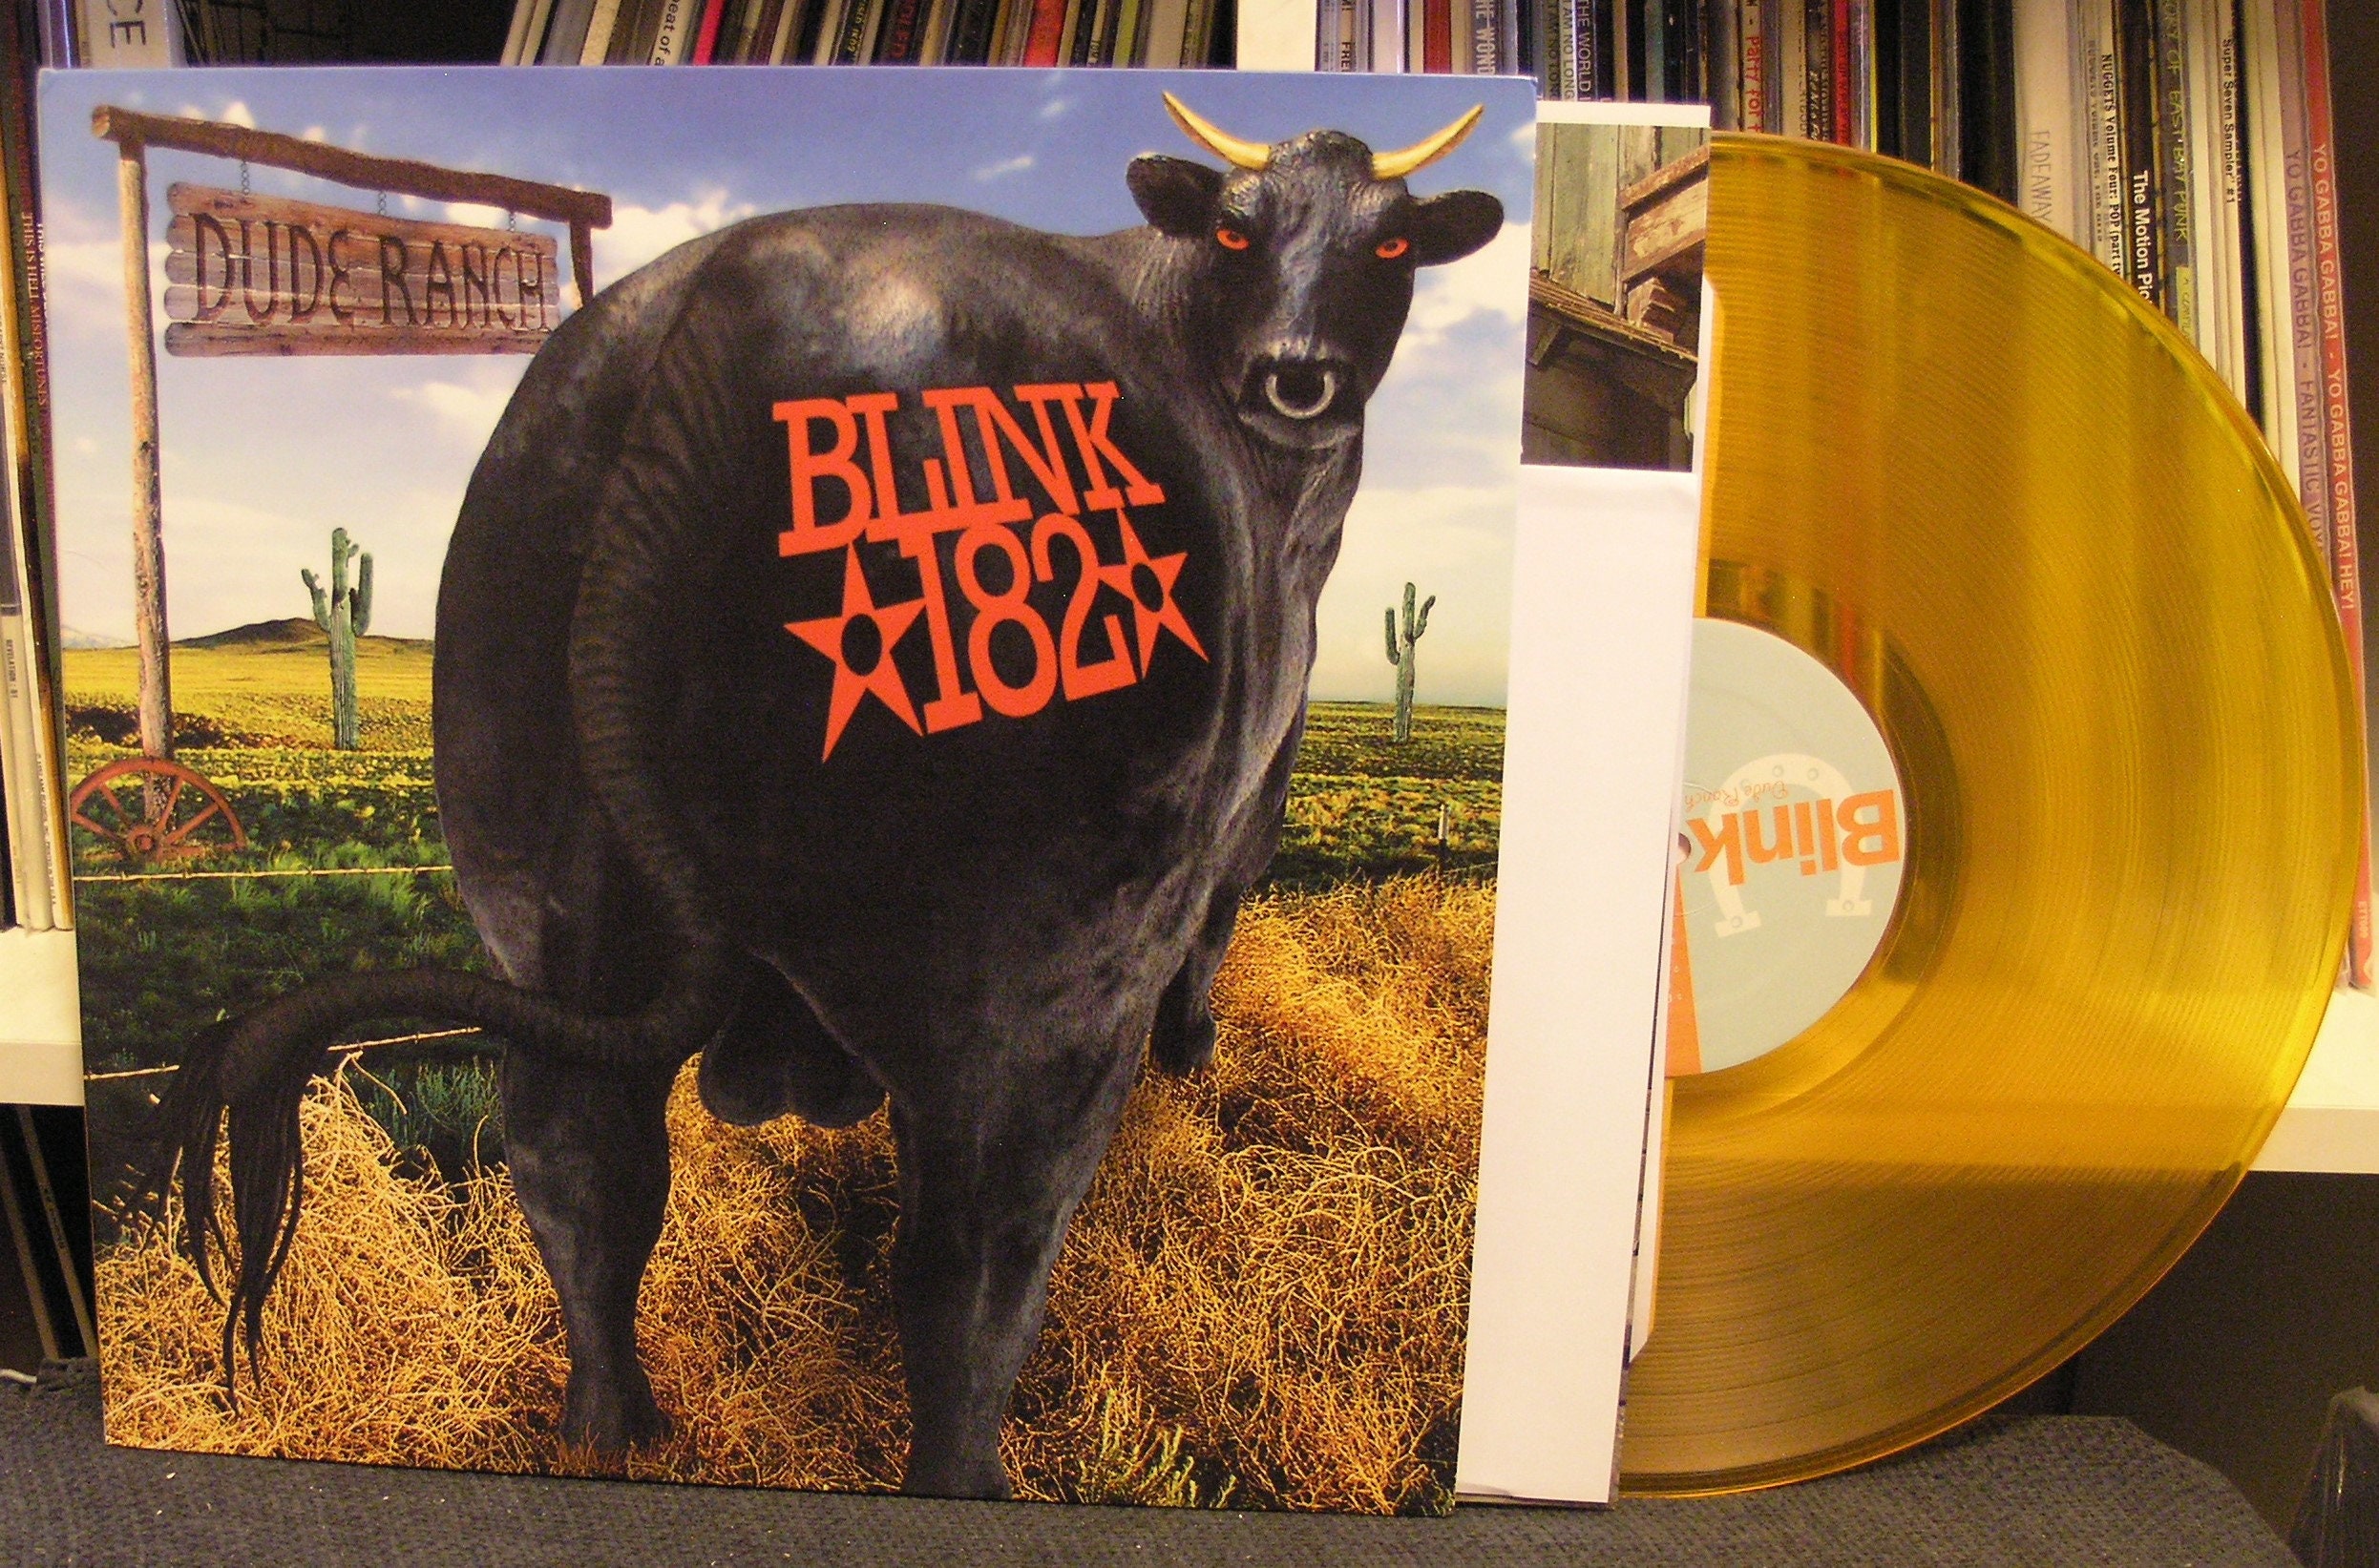 Blink 182 dude Ranch Lpposter NM limited to /500